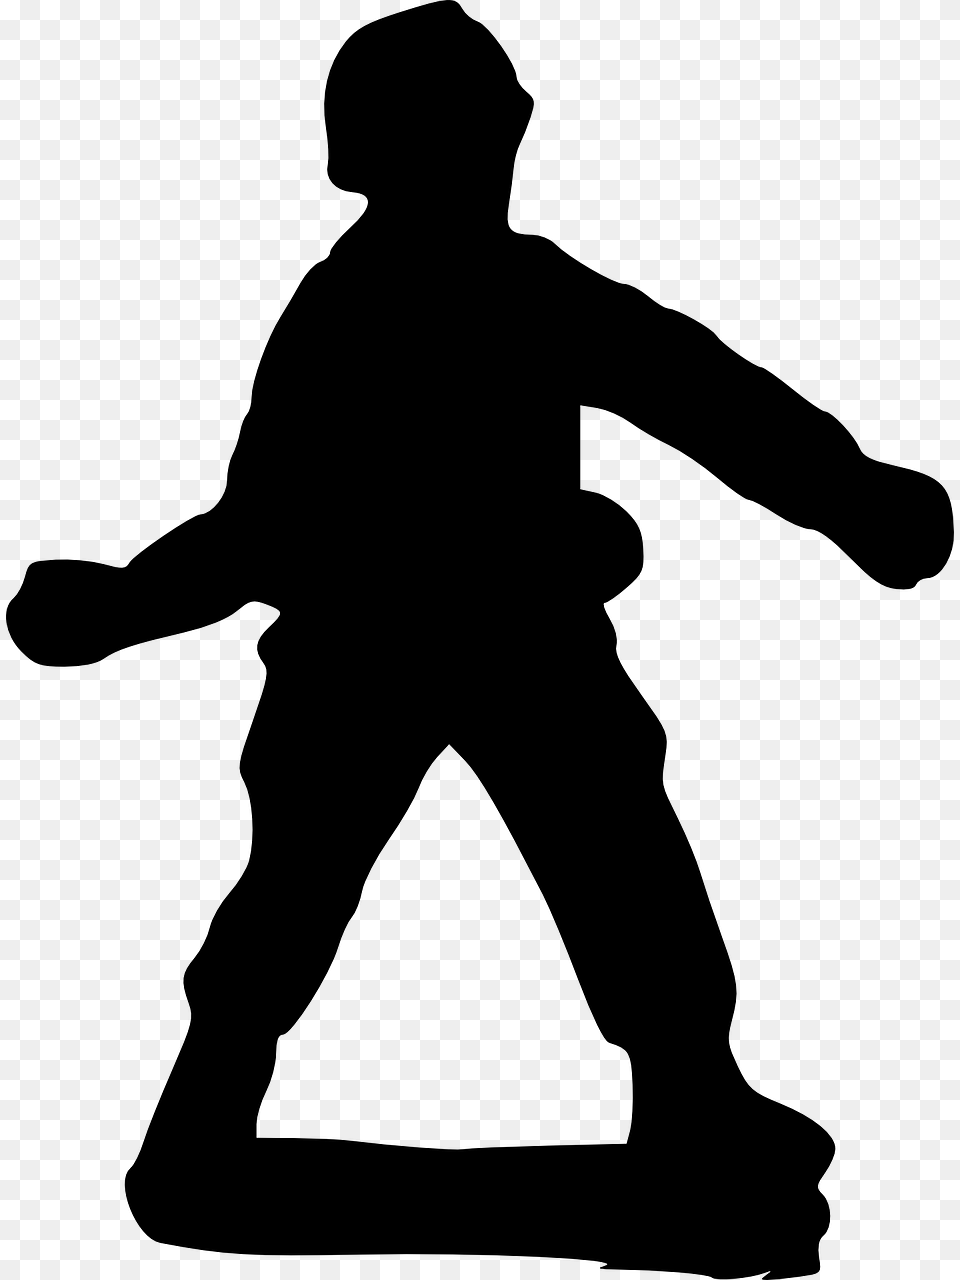 Soldier Silhouette Clip Art Soldier Throwing A Grenade Outline, Gray Free Png